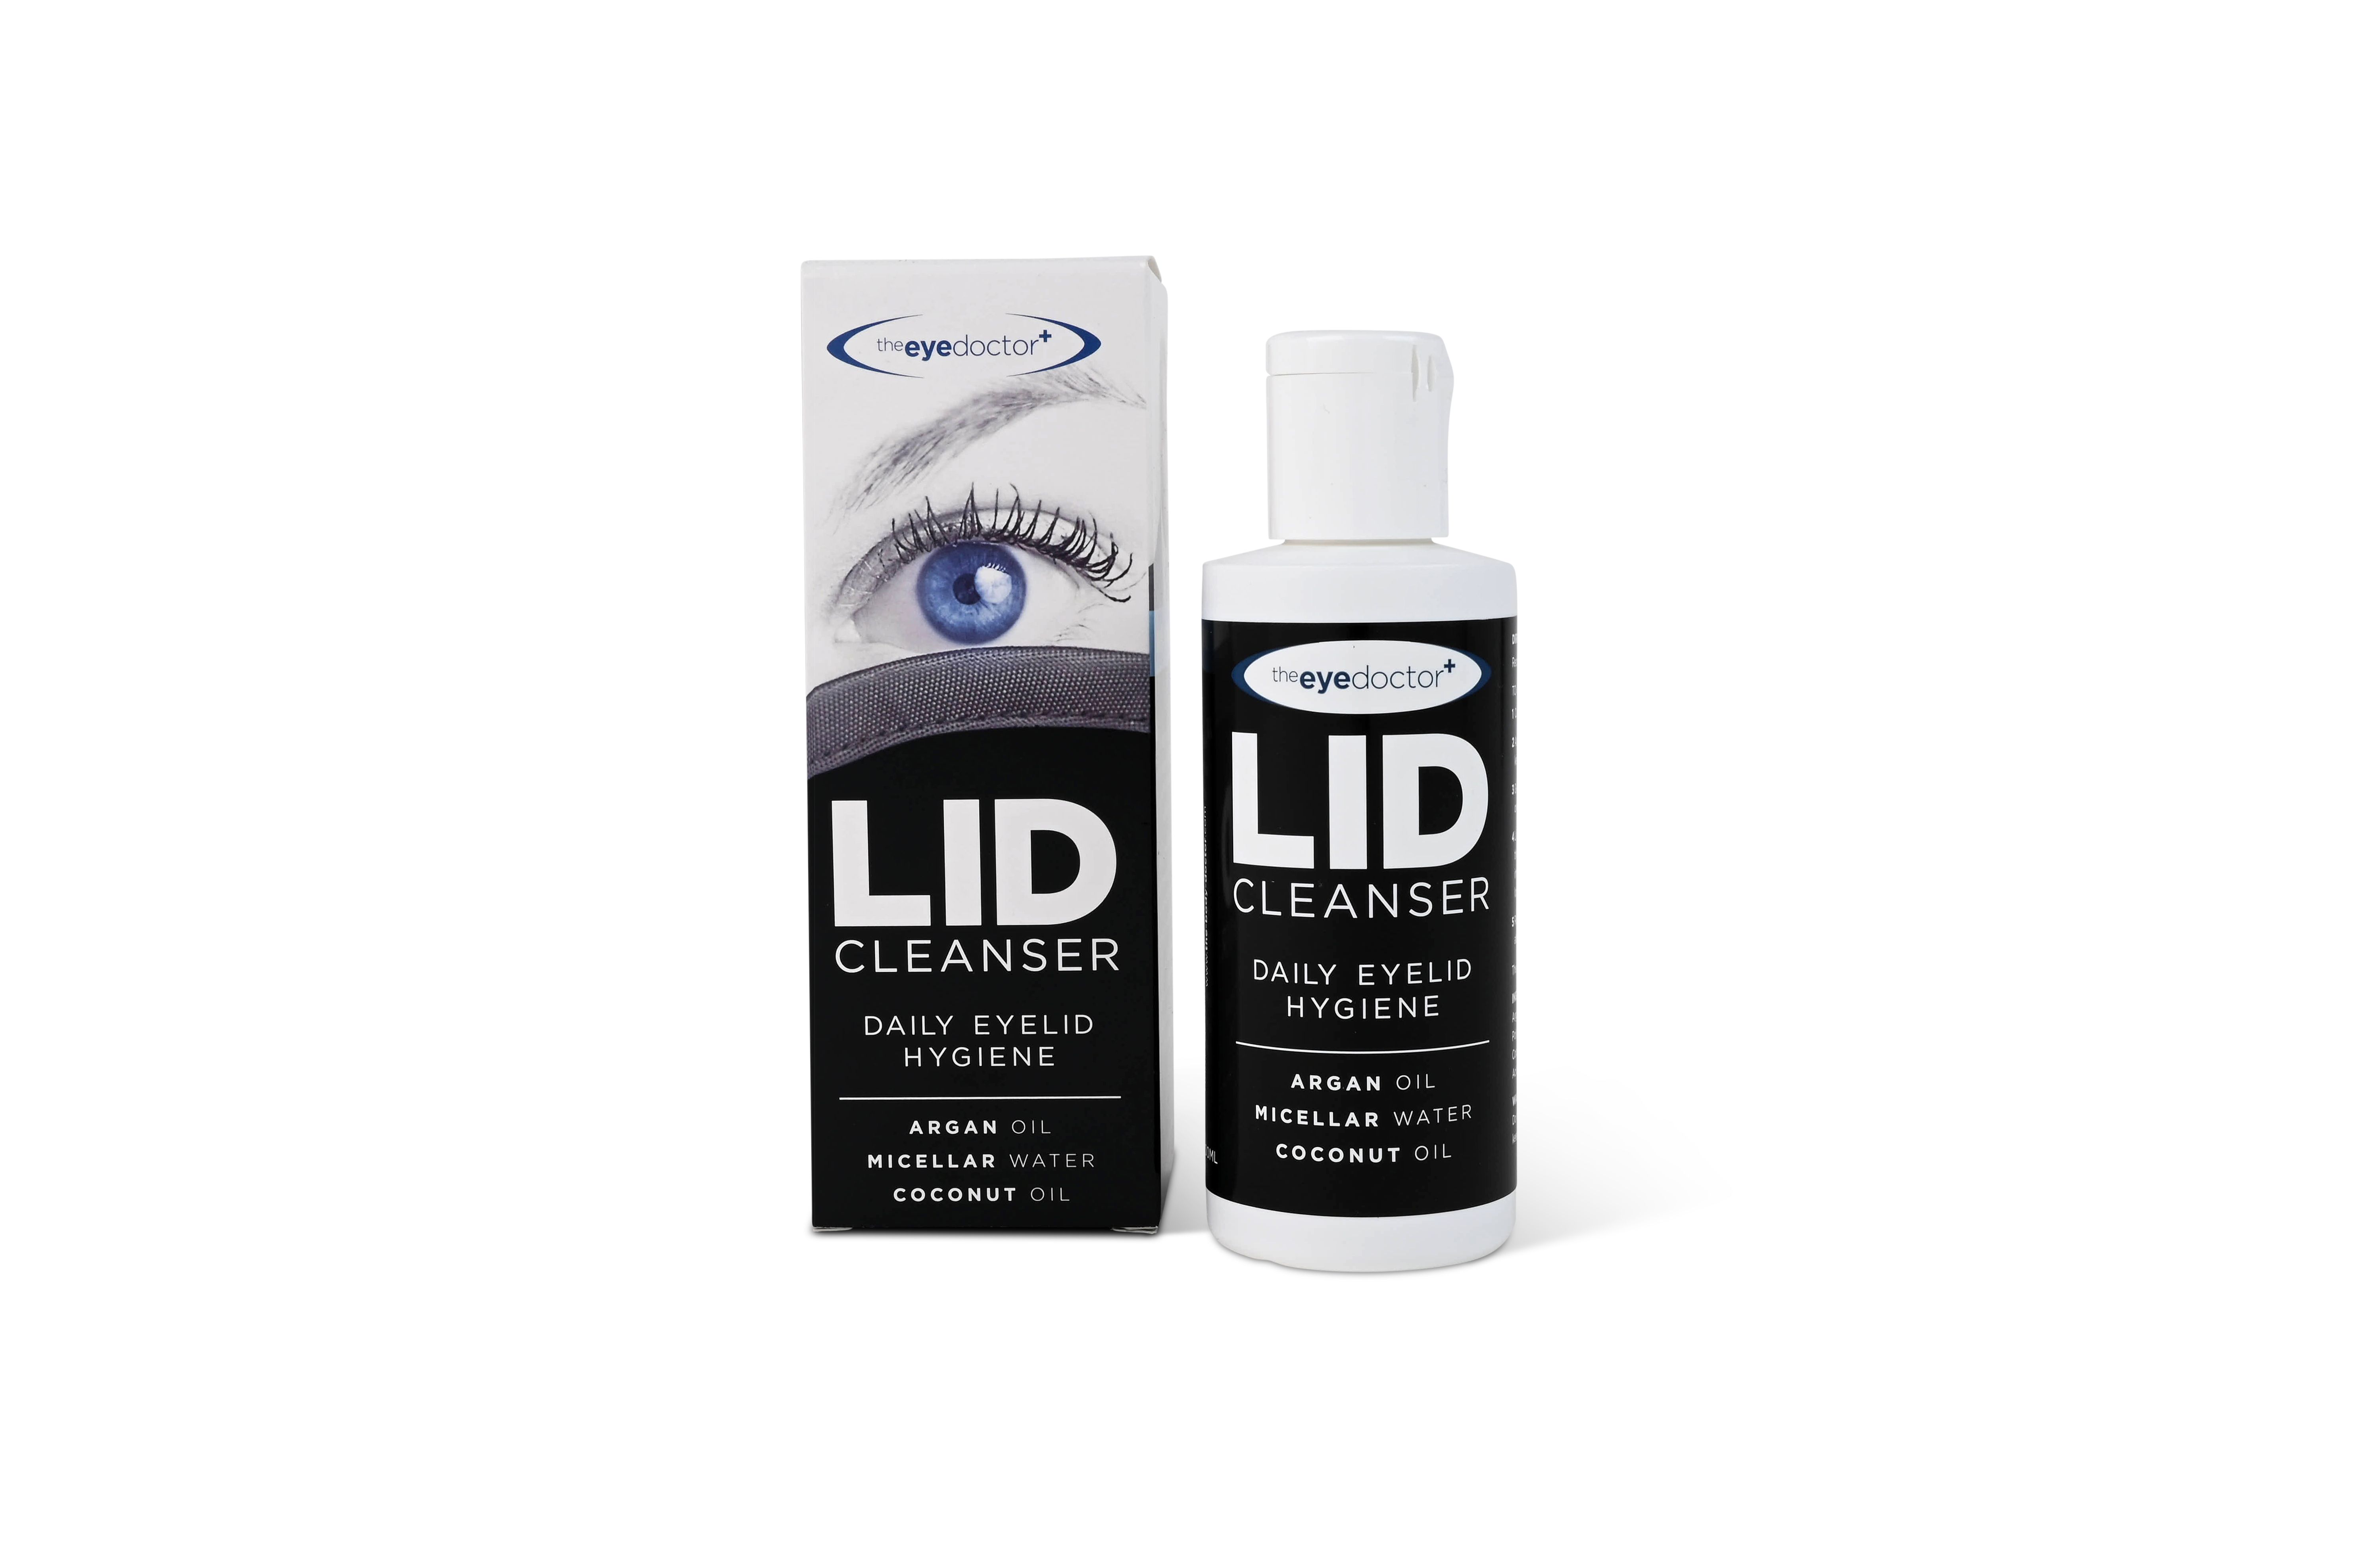 The Eye Doctor LID Cleanser